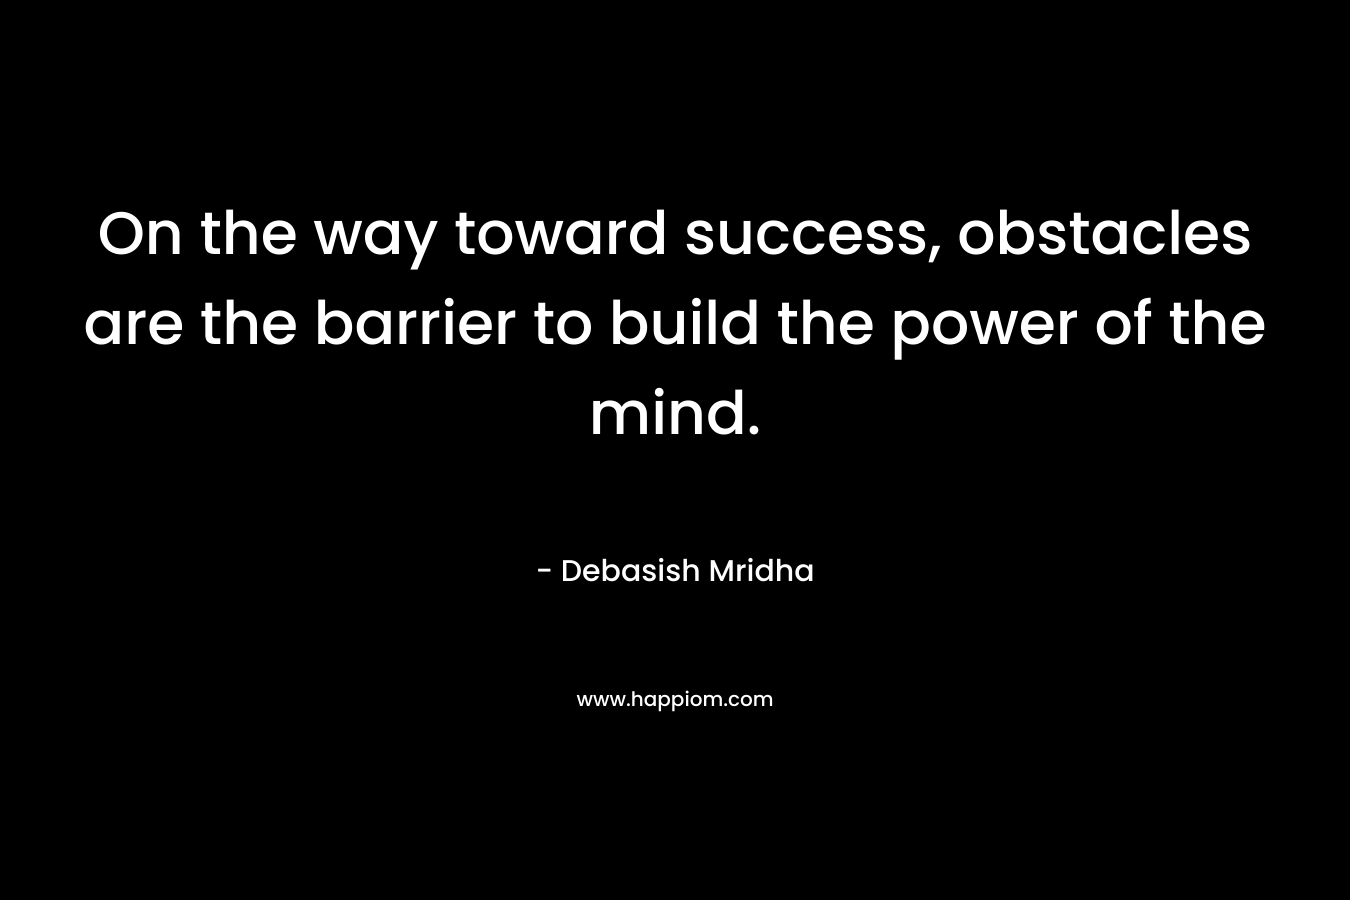 On the way toward success, obstacles are the barrier to build the power of the mind.